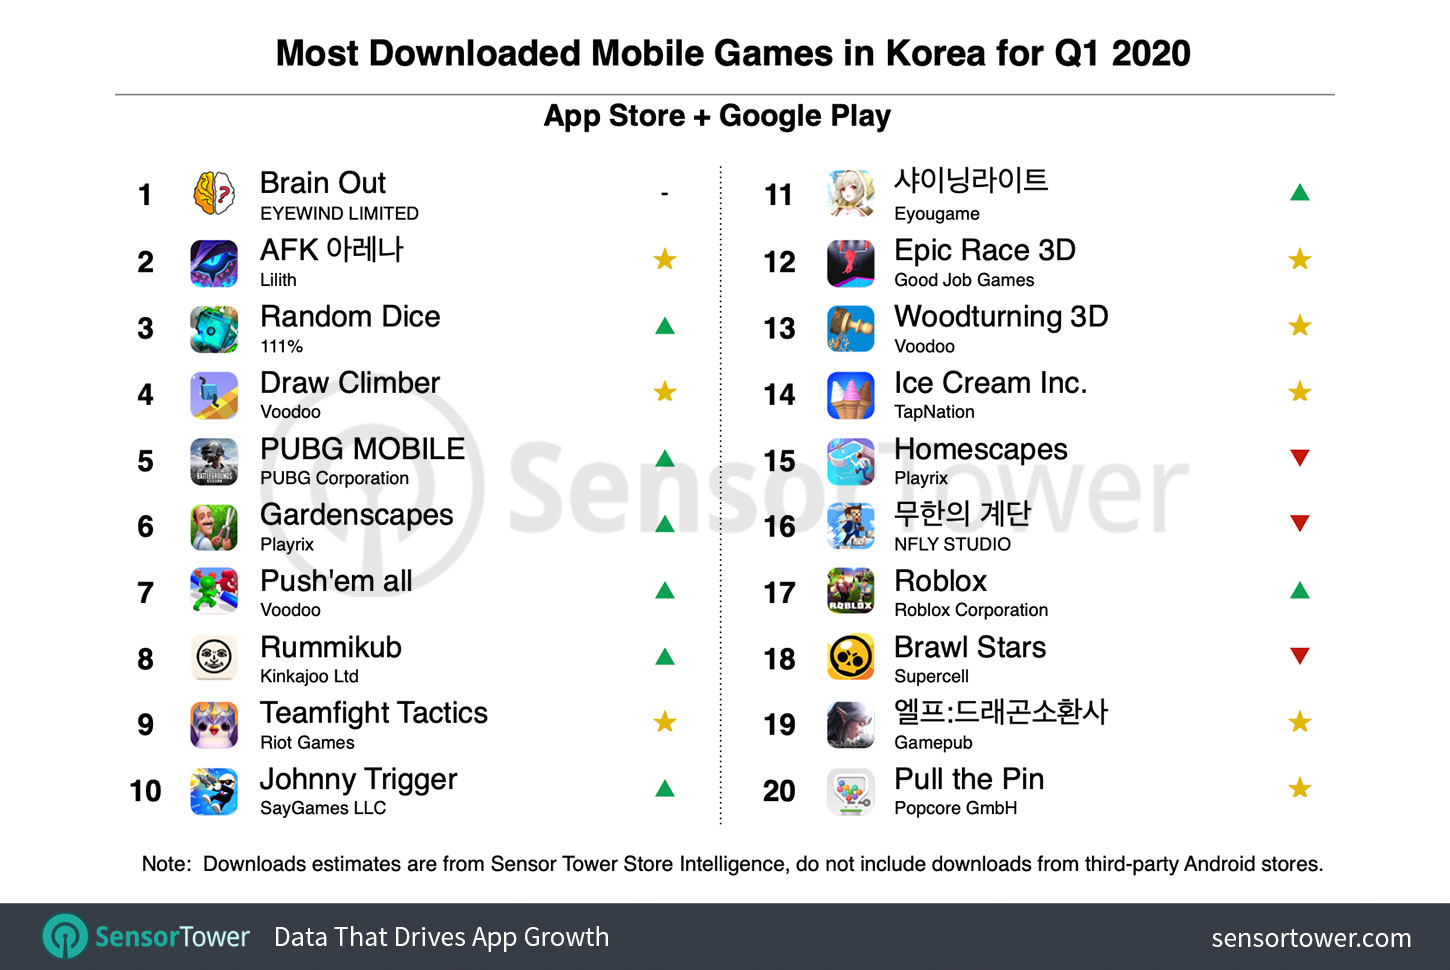 South Korean Mobile Game Spending Grew Nearly 15 in Q1 2020 to 1.1